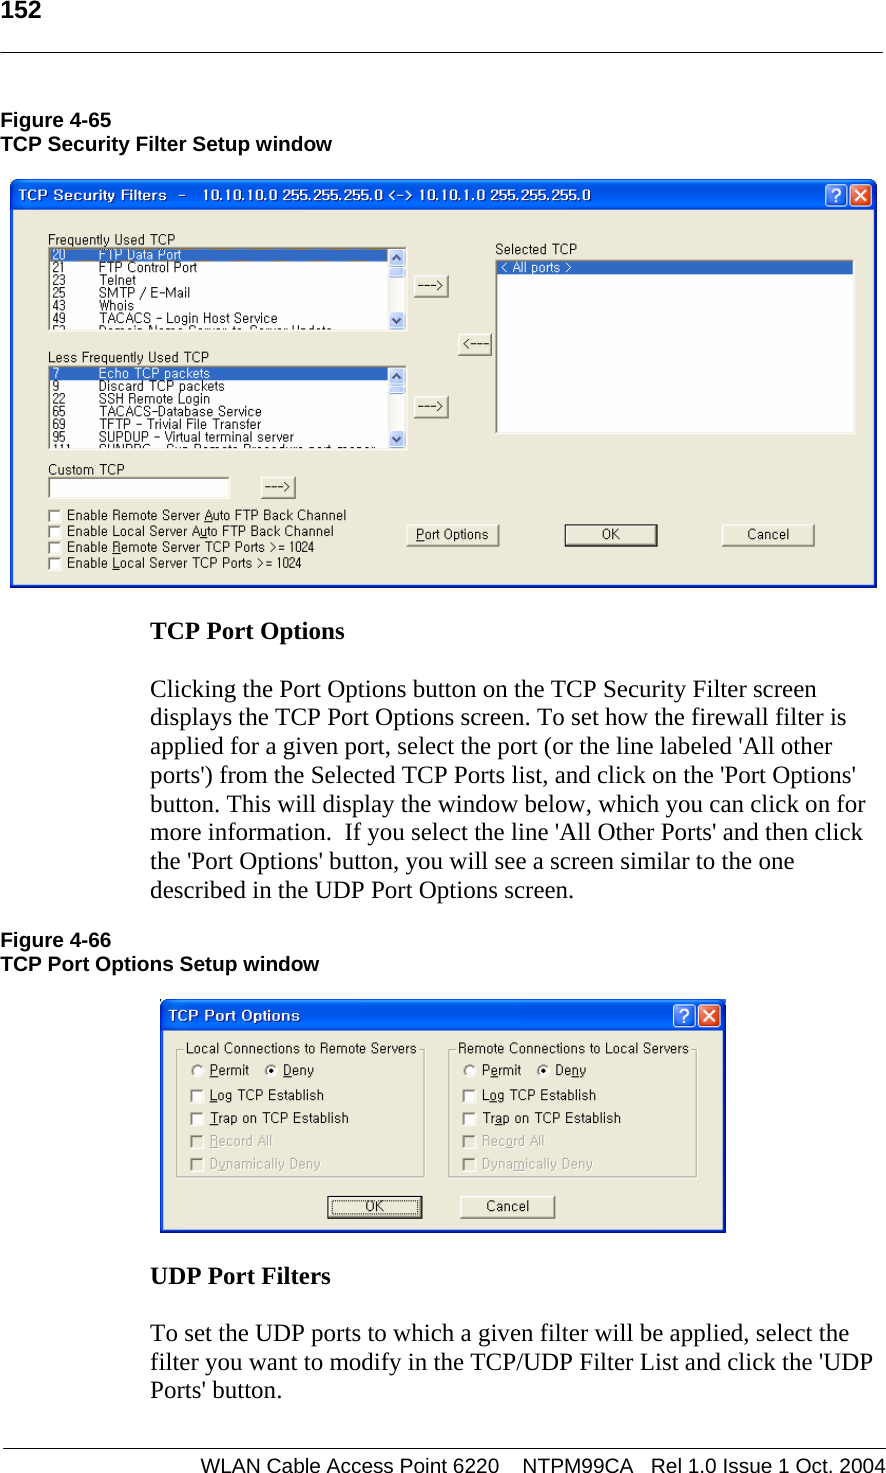   152   Figure 4-65 TCP Security Filter Setup window    TCP Port Options   Clicking the Port Options button on the TCP Security Filter screen displays the TCP Port Options screen. To set how the firewall filter is applied for a given port, select the port (or the line labeled &apos;All other ports&apos;) from the Selected TCP Ports list, and click on the &apos;Port Options&apos; button. This will display the window below, which you can click on for more information.  If you select the line &apos;All Other Ports&apos; and then click the &apos;Port Options&apos; button, you will see a screen similar to the one described in the UDP Port Options screen.  Figure 4-66 TCP Port Options Setup window    UDP Port Filters   To set the UDP ports to which a given filter will be applied, select the filter you want to modify in the TCP/UDP Filter List and click the &apos;UDP Ports&apos; button.   WLAN Cable Access Point 6220    NTPM99CA   Rel 1.0 Issue 1 Oct. 2004